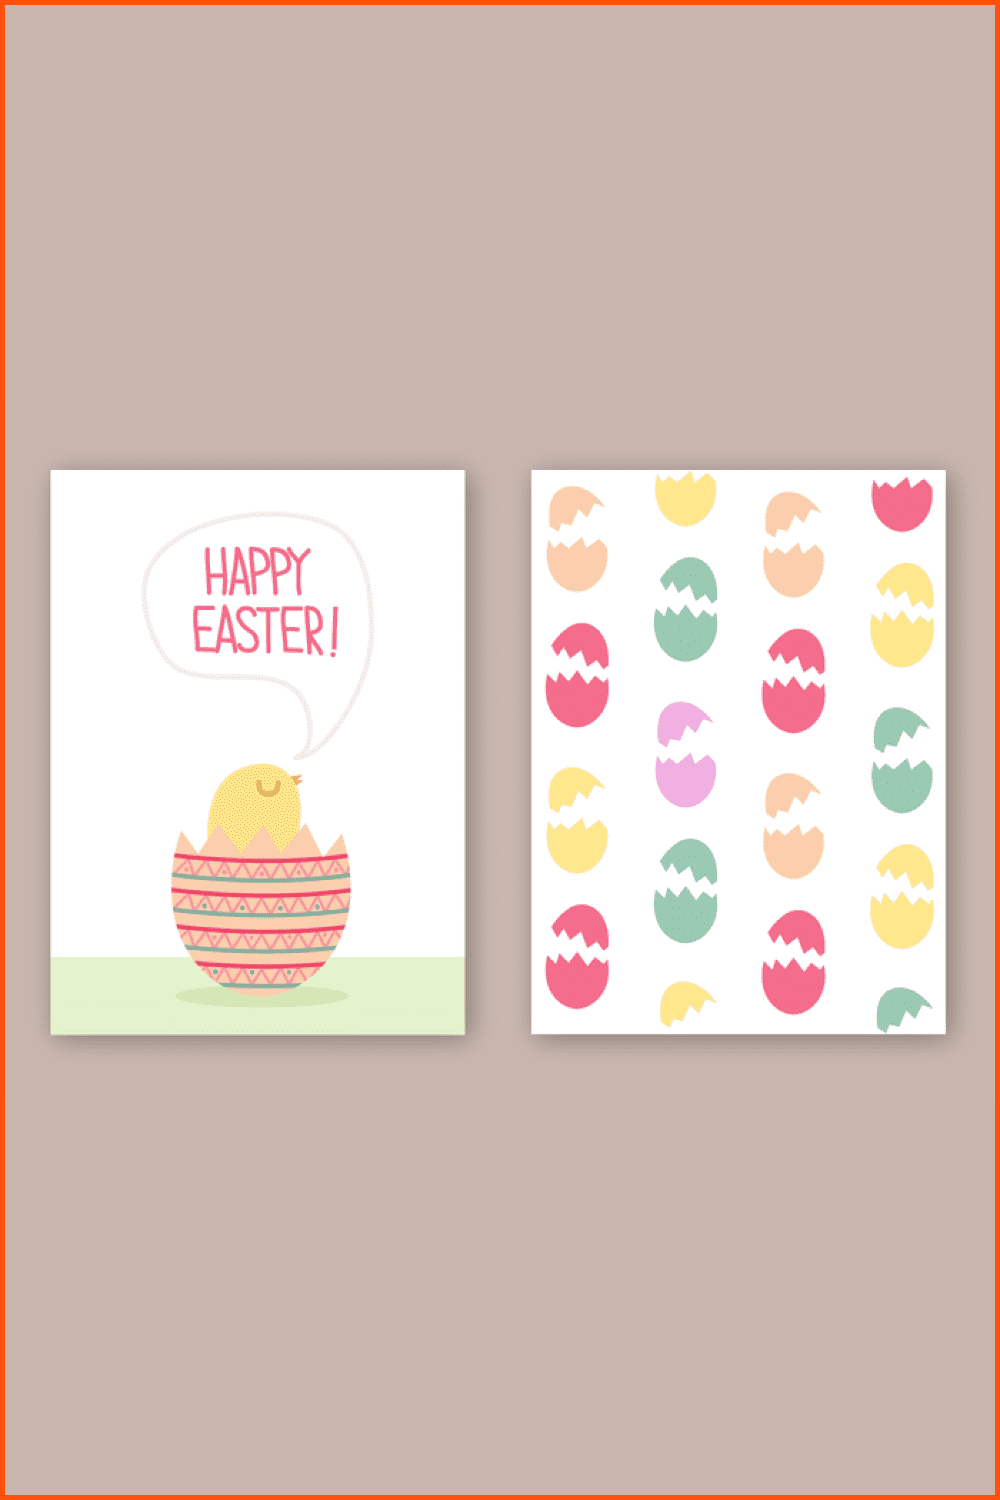 Free Easter Card Vector.